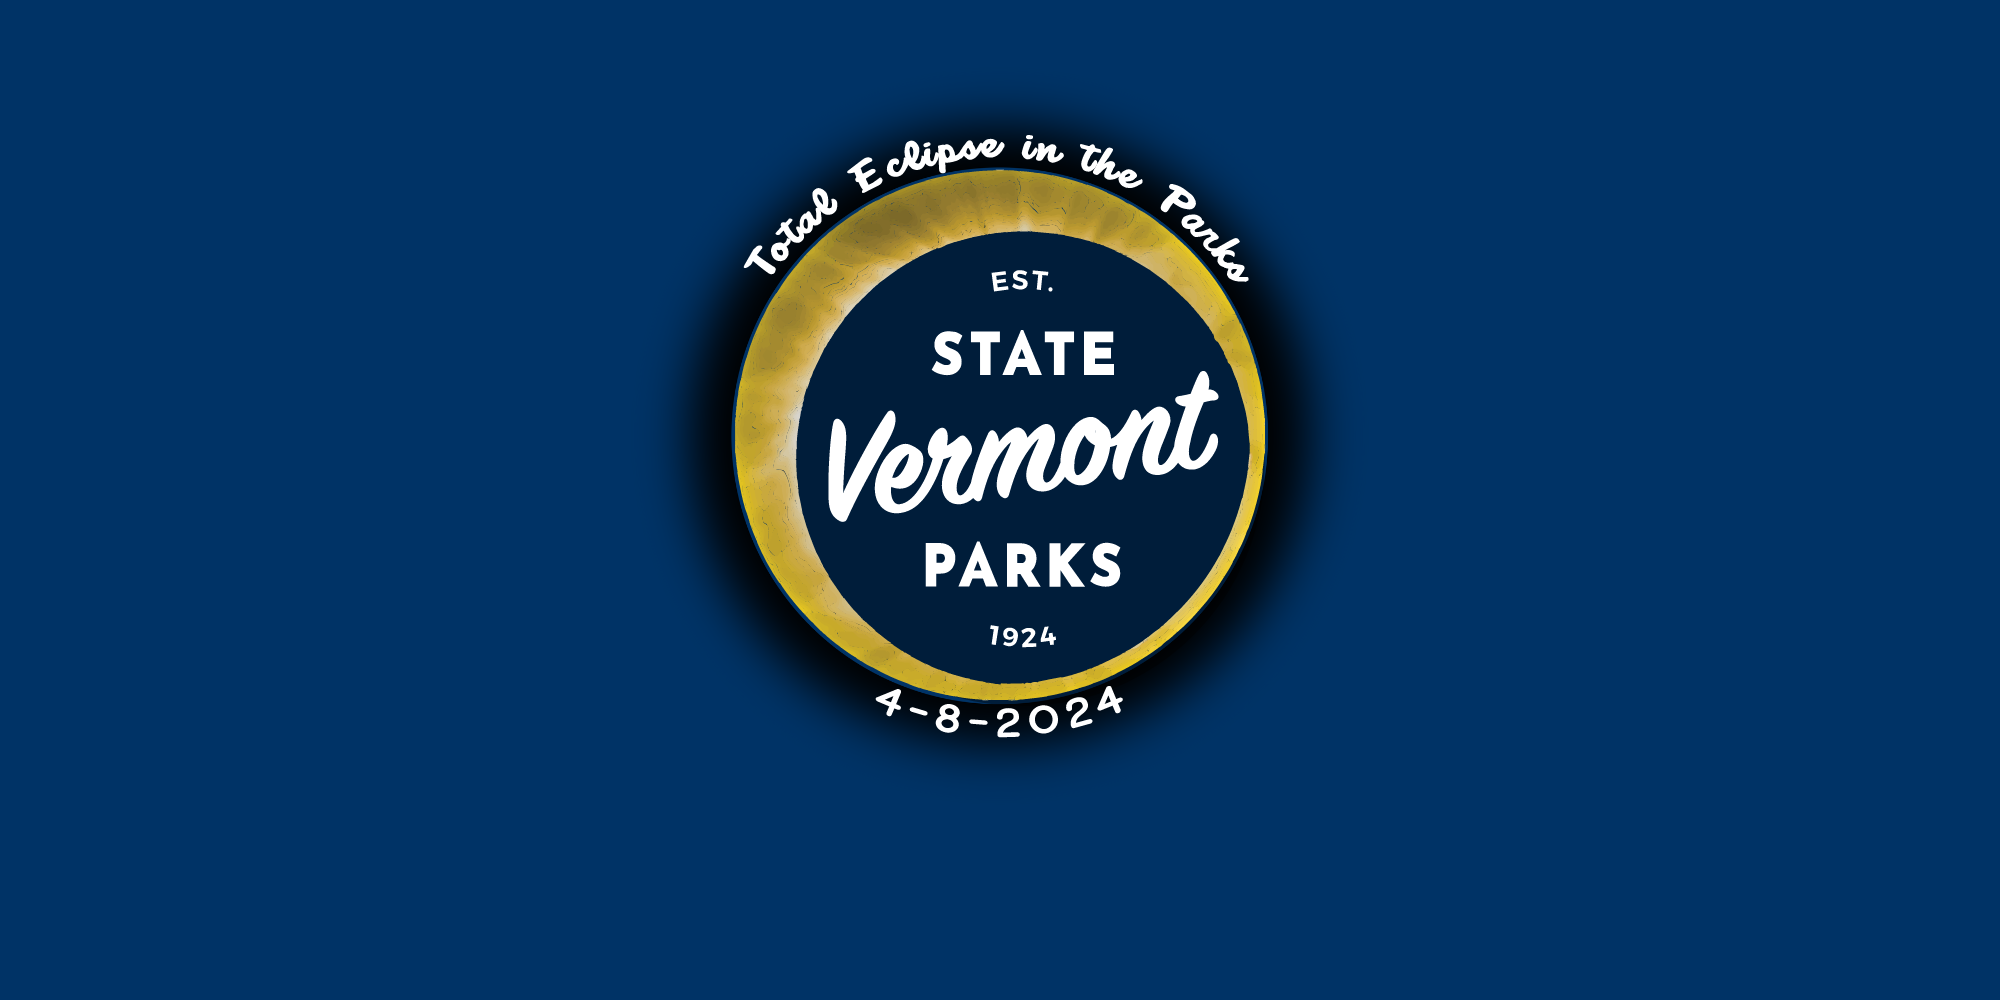 An image of the sun eclipsed by the Vermont State Parks Logo. On the edge of the circle, the text reads Total Eclipse in the Parks 4-8-2024.